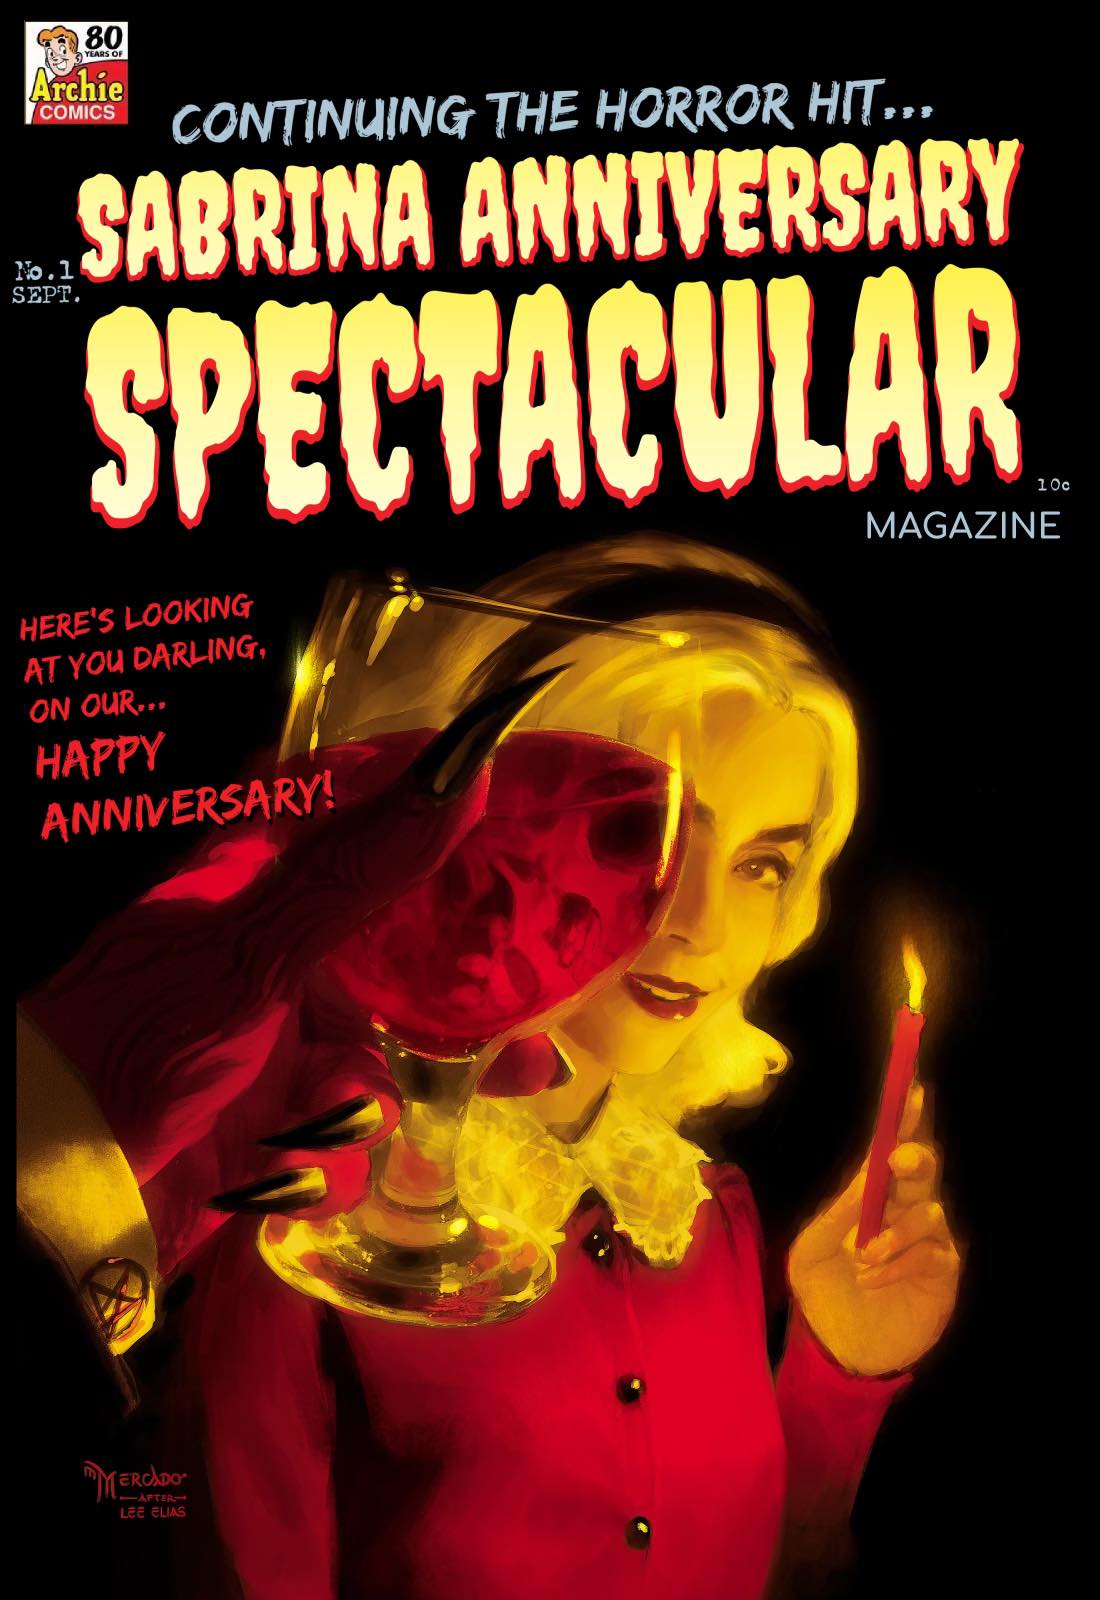 SABRINA ANNIVERSARY SPECTACULAR #1 MIGUEL MERCADO 'CHAMBER OF CHILLS #19' HOMAGE VARIANT LIMITED TO 200 COPIES WITH NUMBERED COA